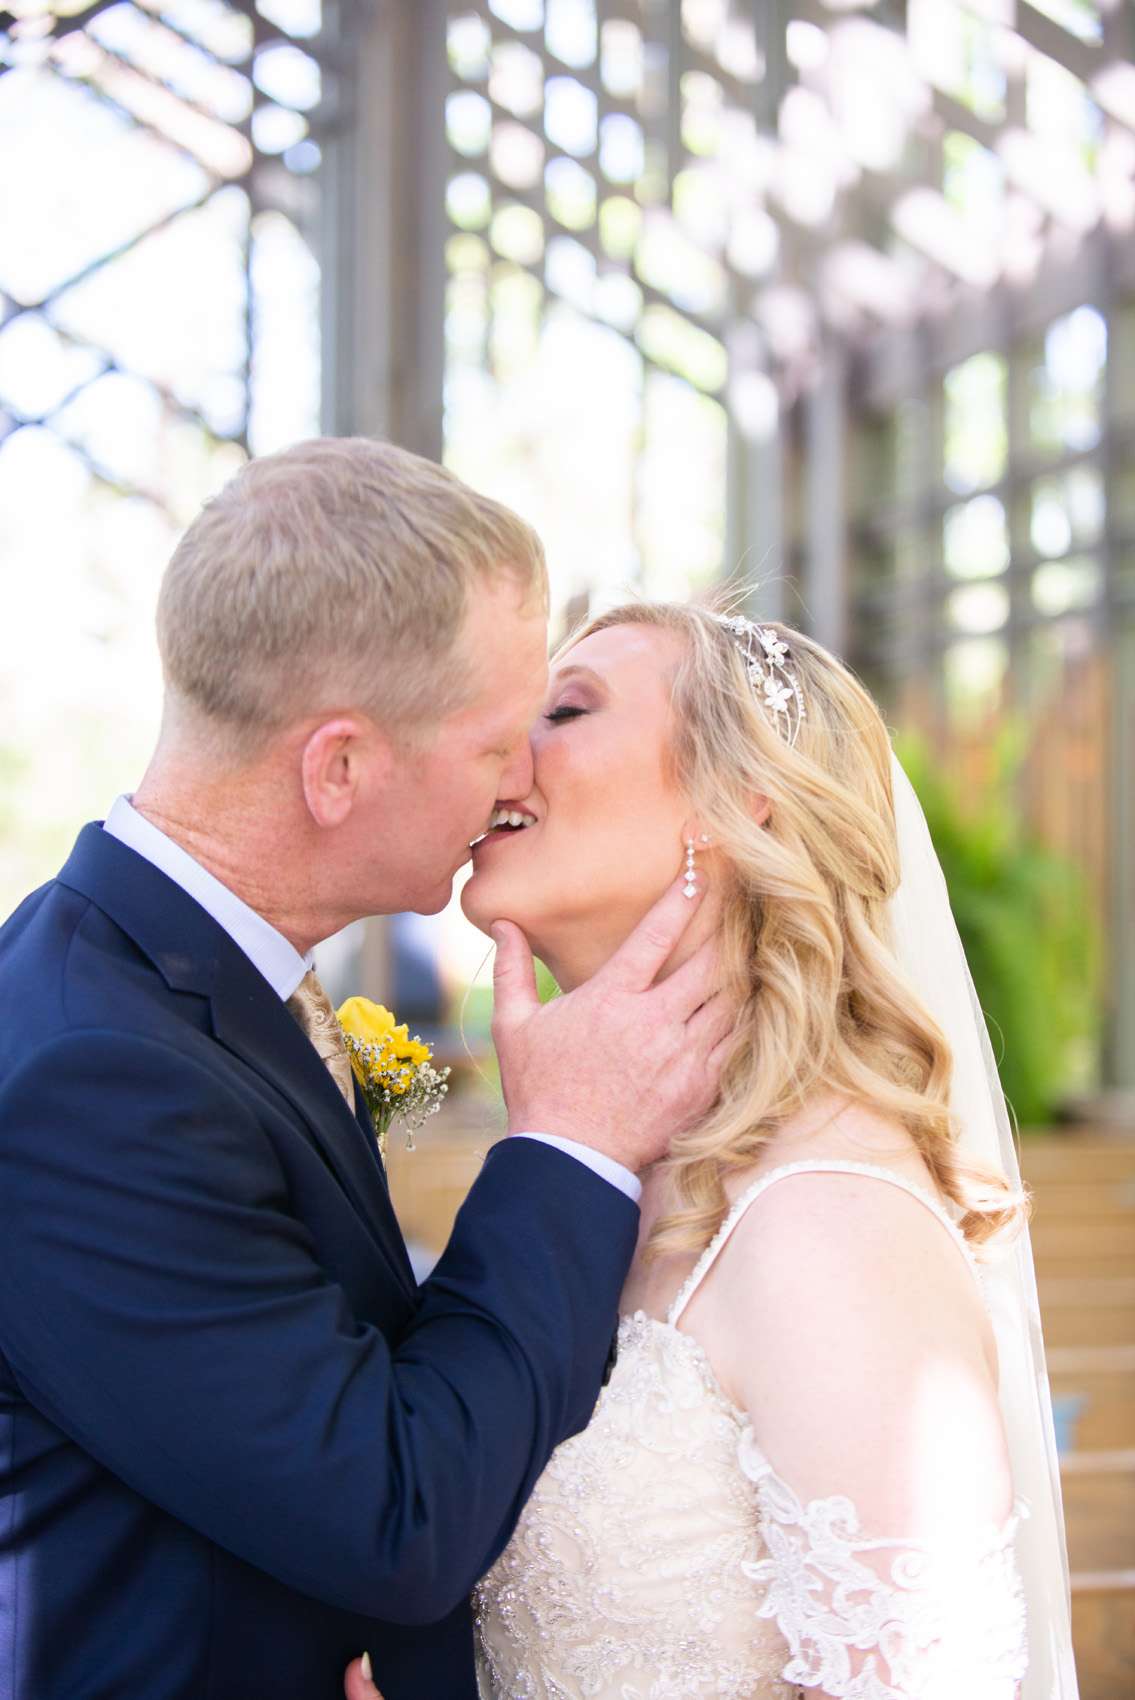 Wedding couple kissing for photos after ceremony